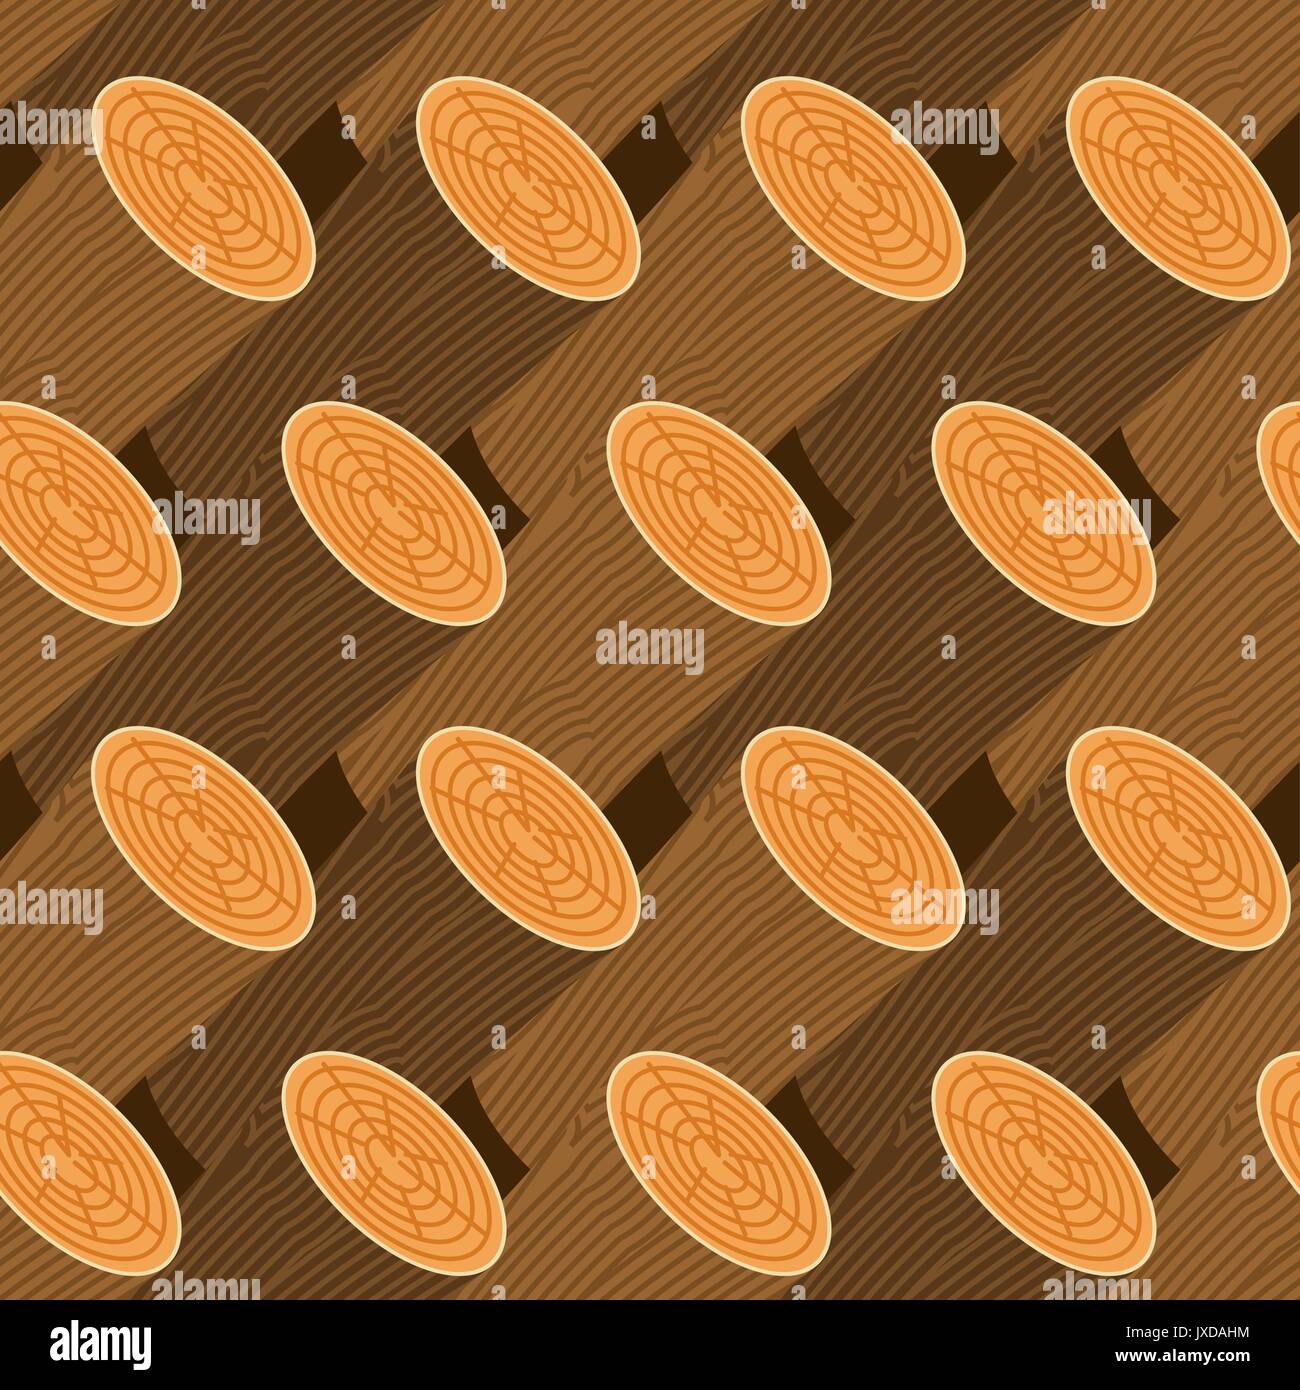 log seamless pattern. Wooden billet background. Woodpile Ornament Stock Vector